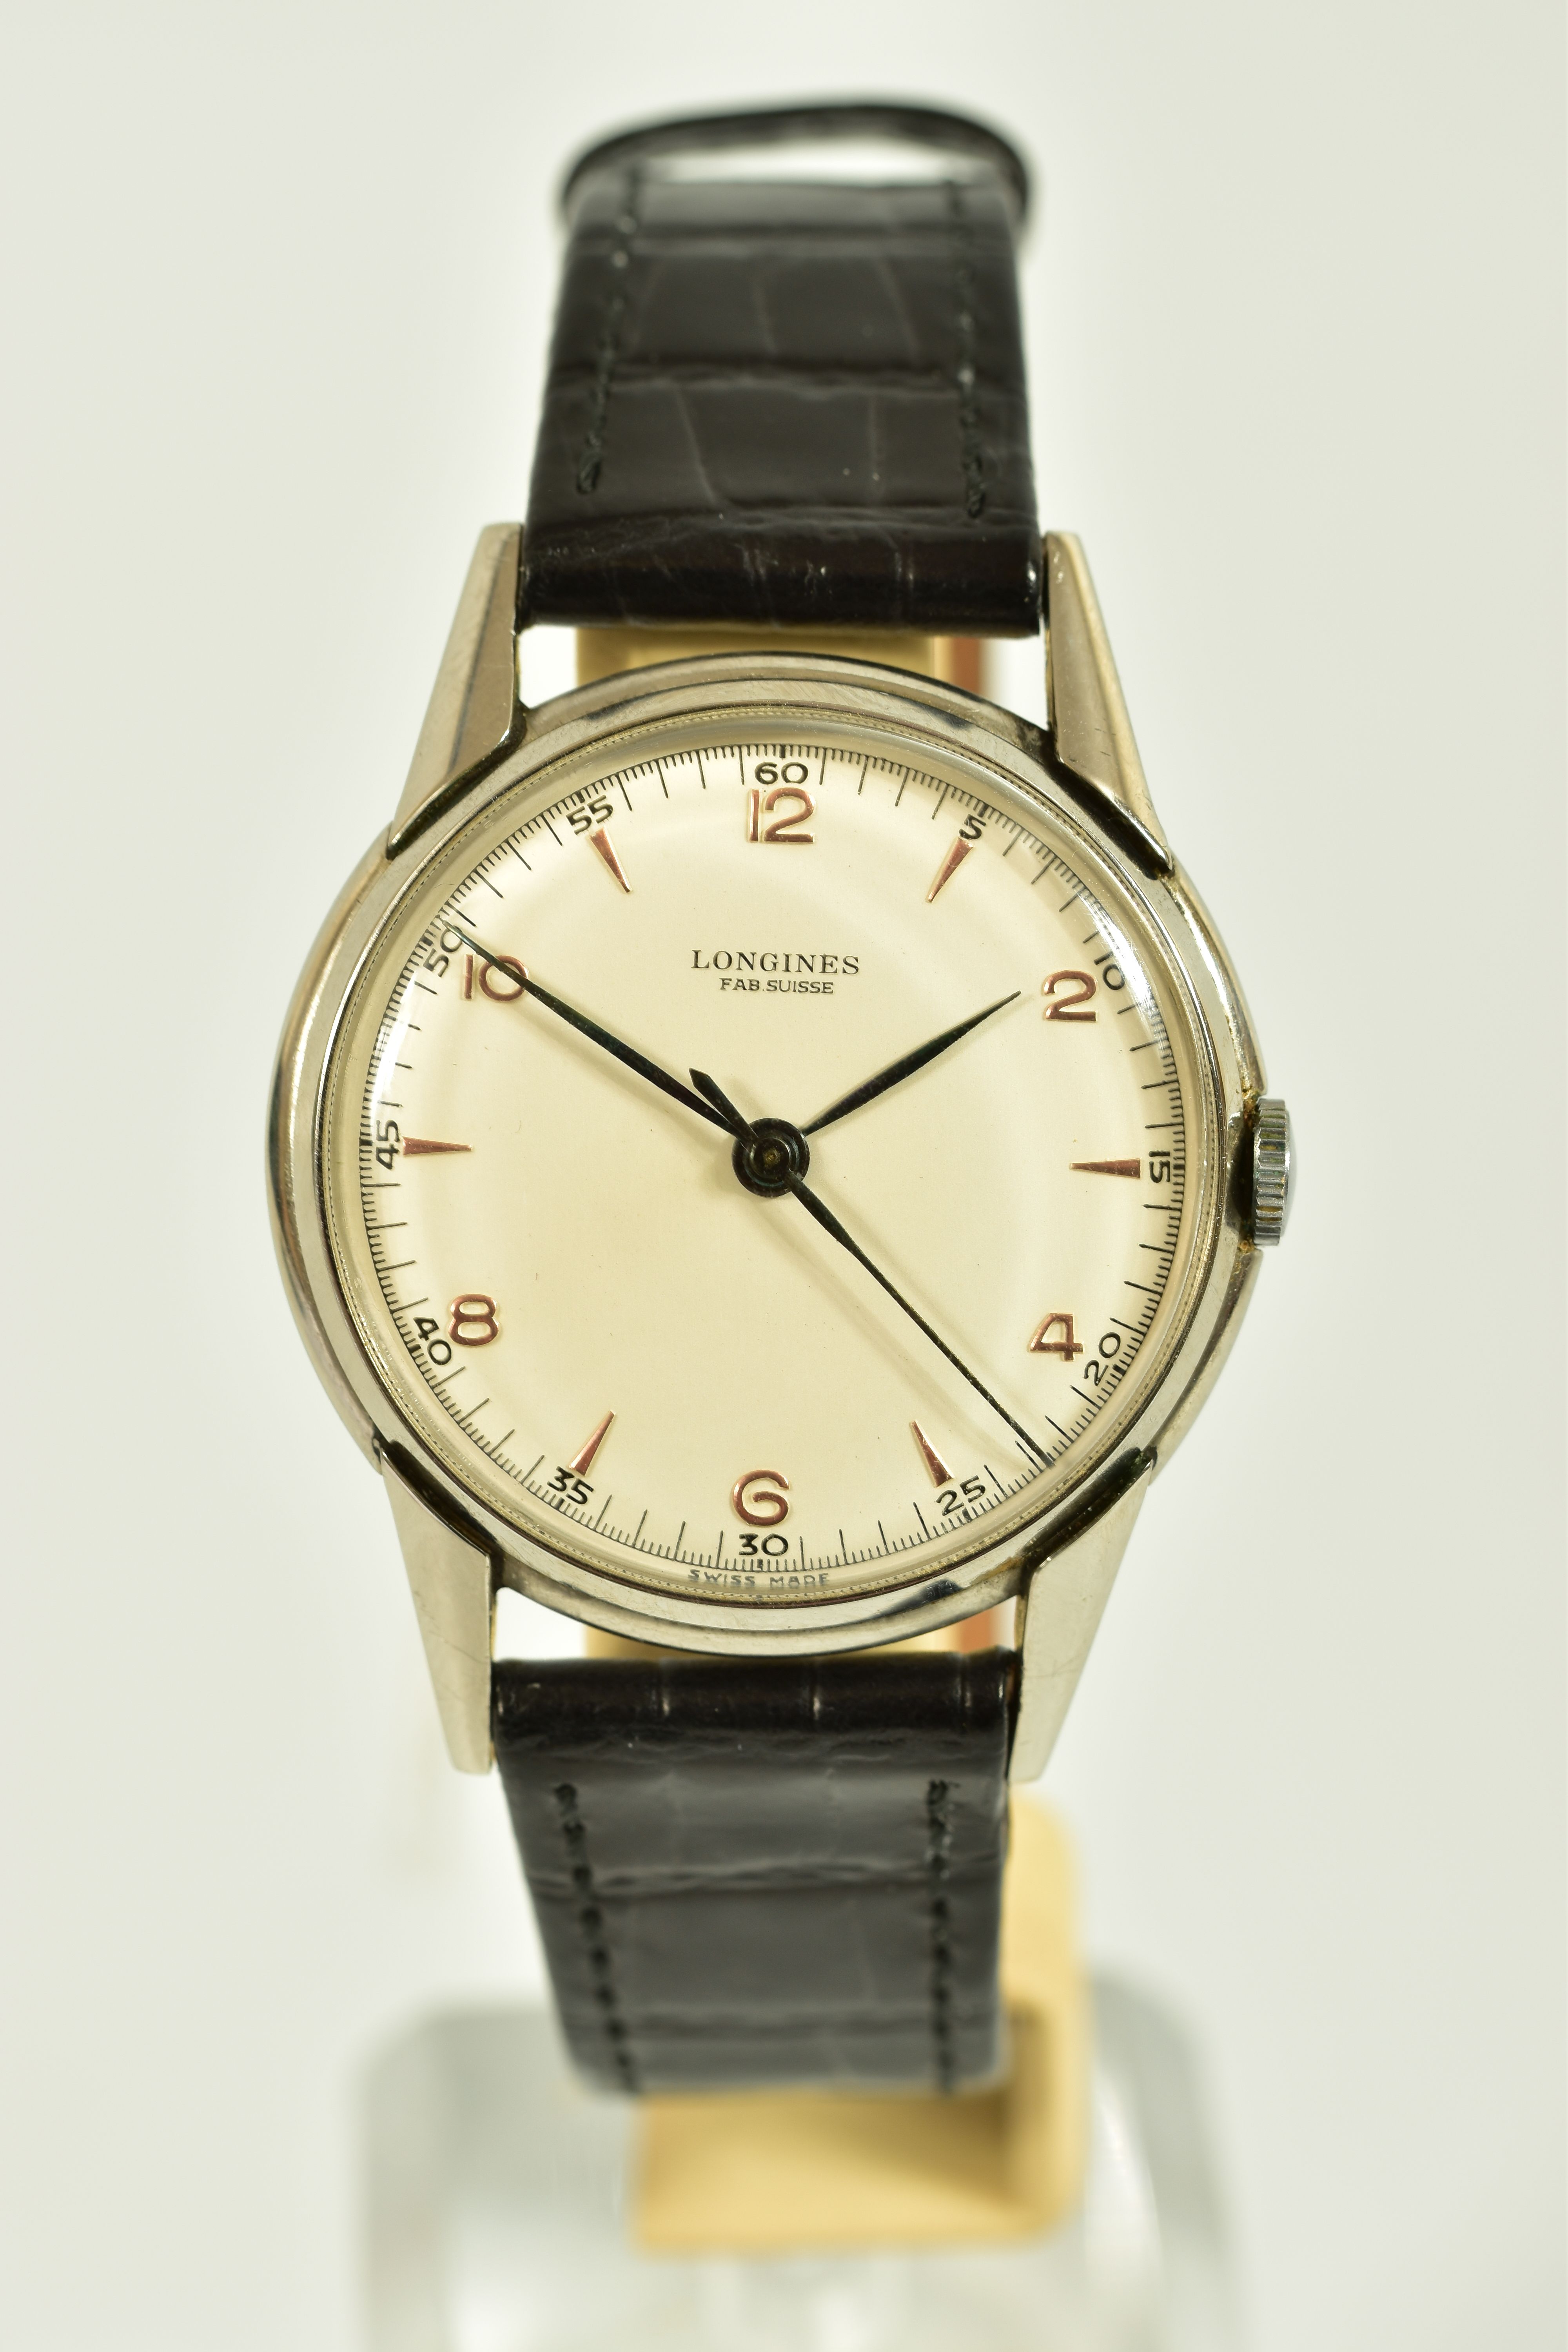 A MECHANICAL LONGINES WRISTWATCH, silvered dial signed 'Longines fab Suisse', rose coloured baton